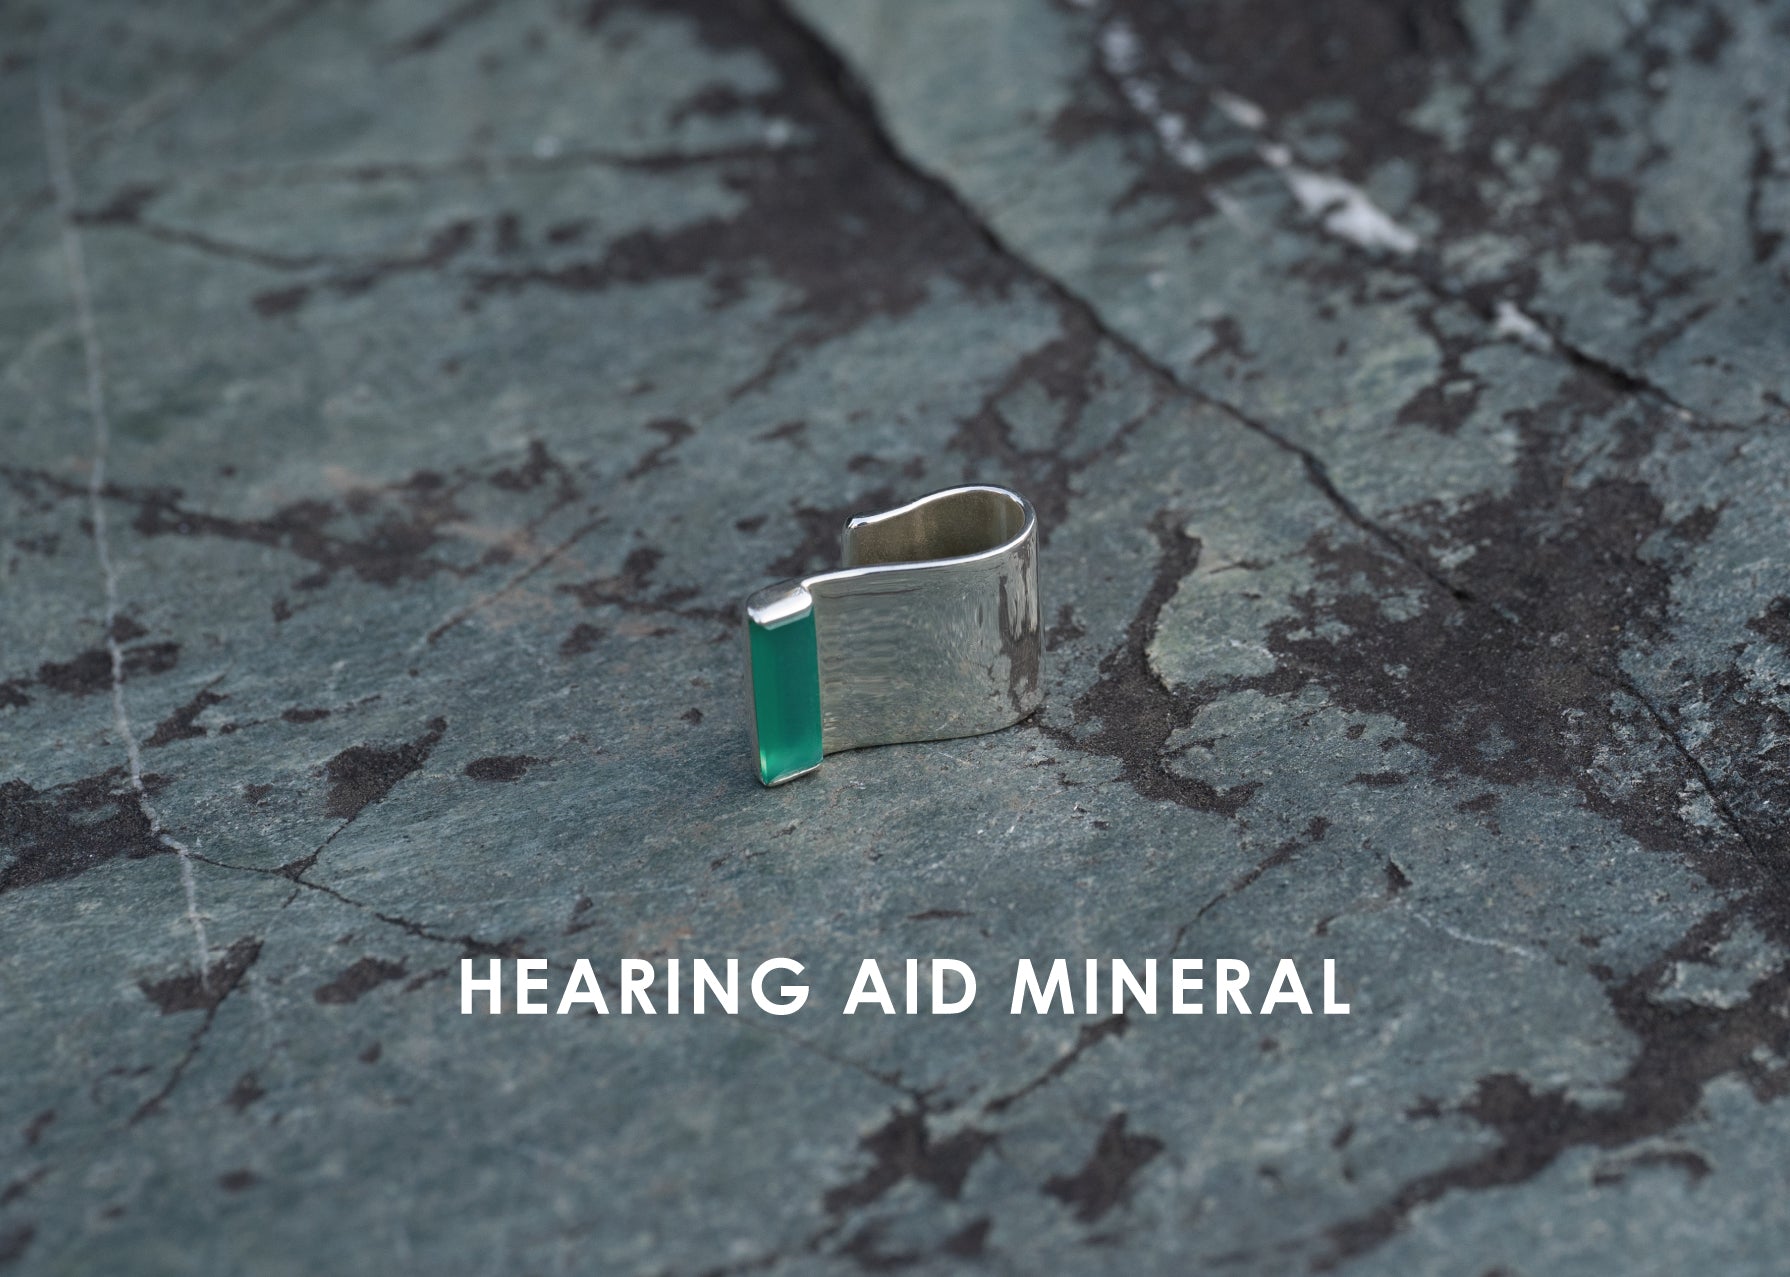 HEARING AID MINERAL – HATRA OFFICIAL